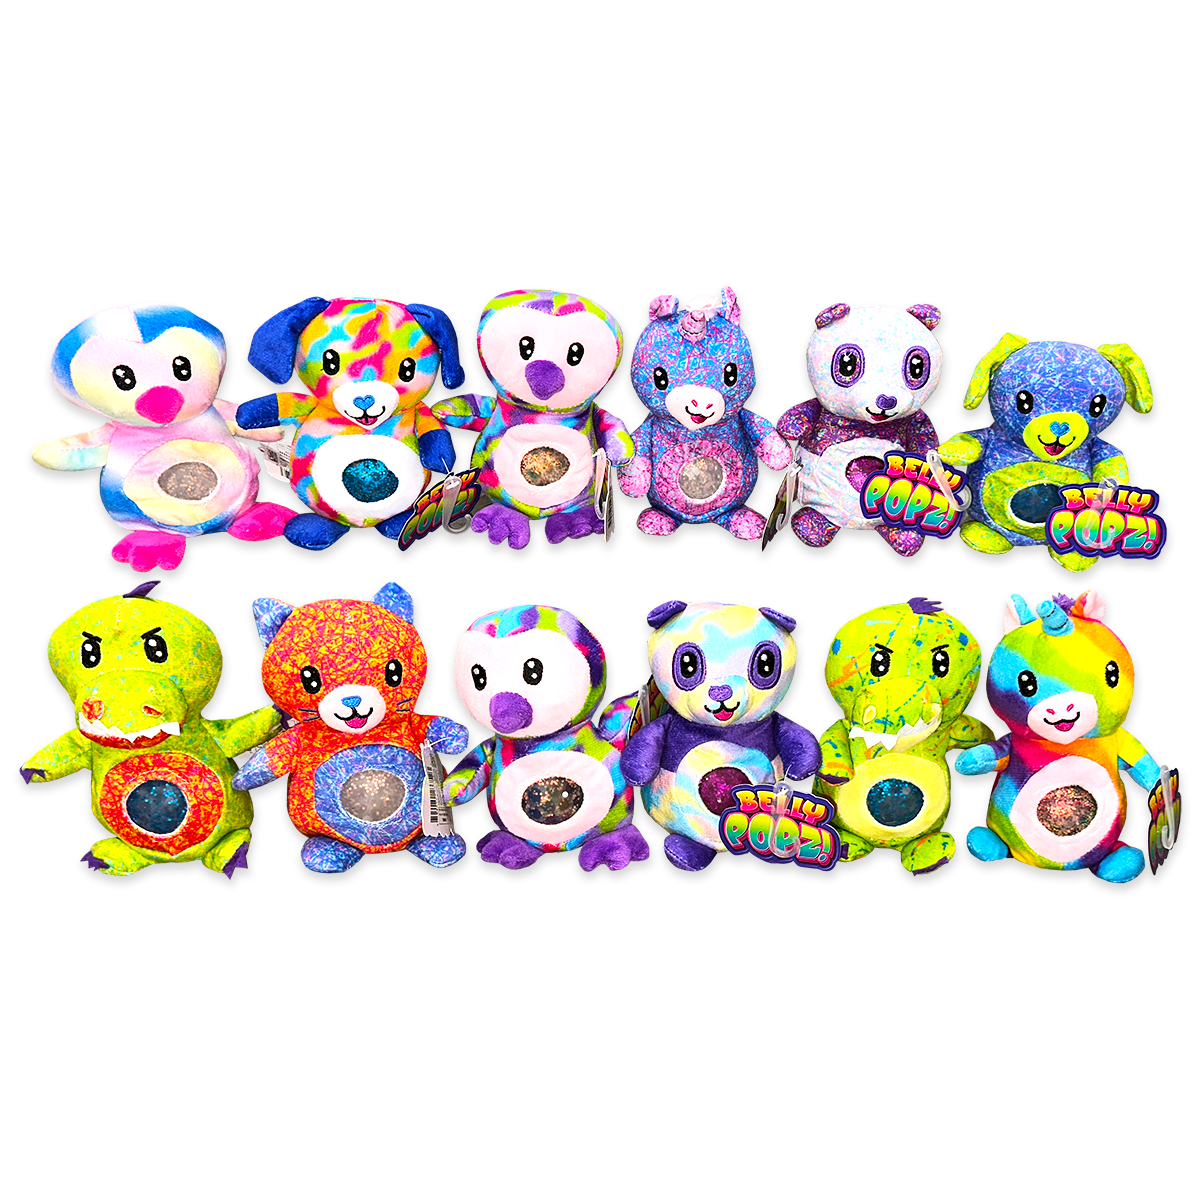 ITEM NUMBER 023752 BELLY POPZ PLUSH TOY 12 PIECES PER DISPLAY